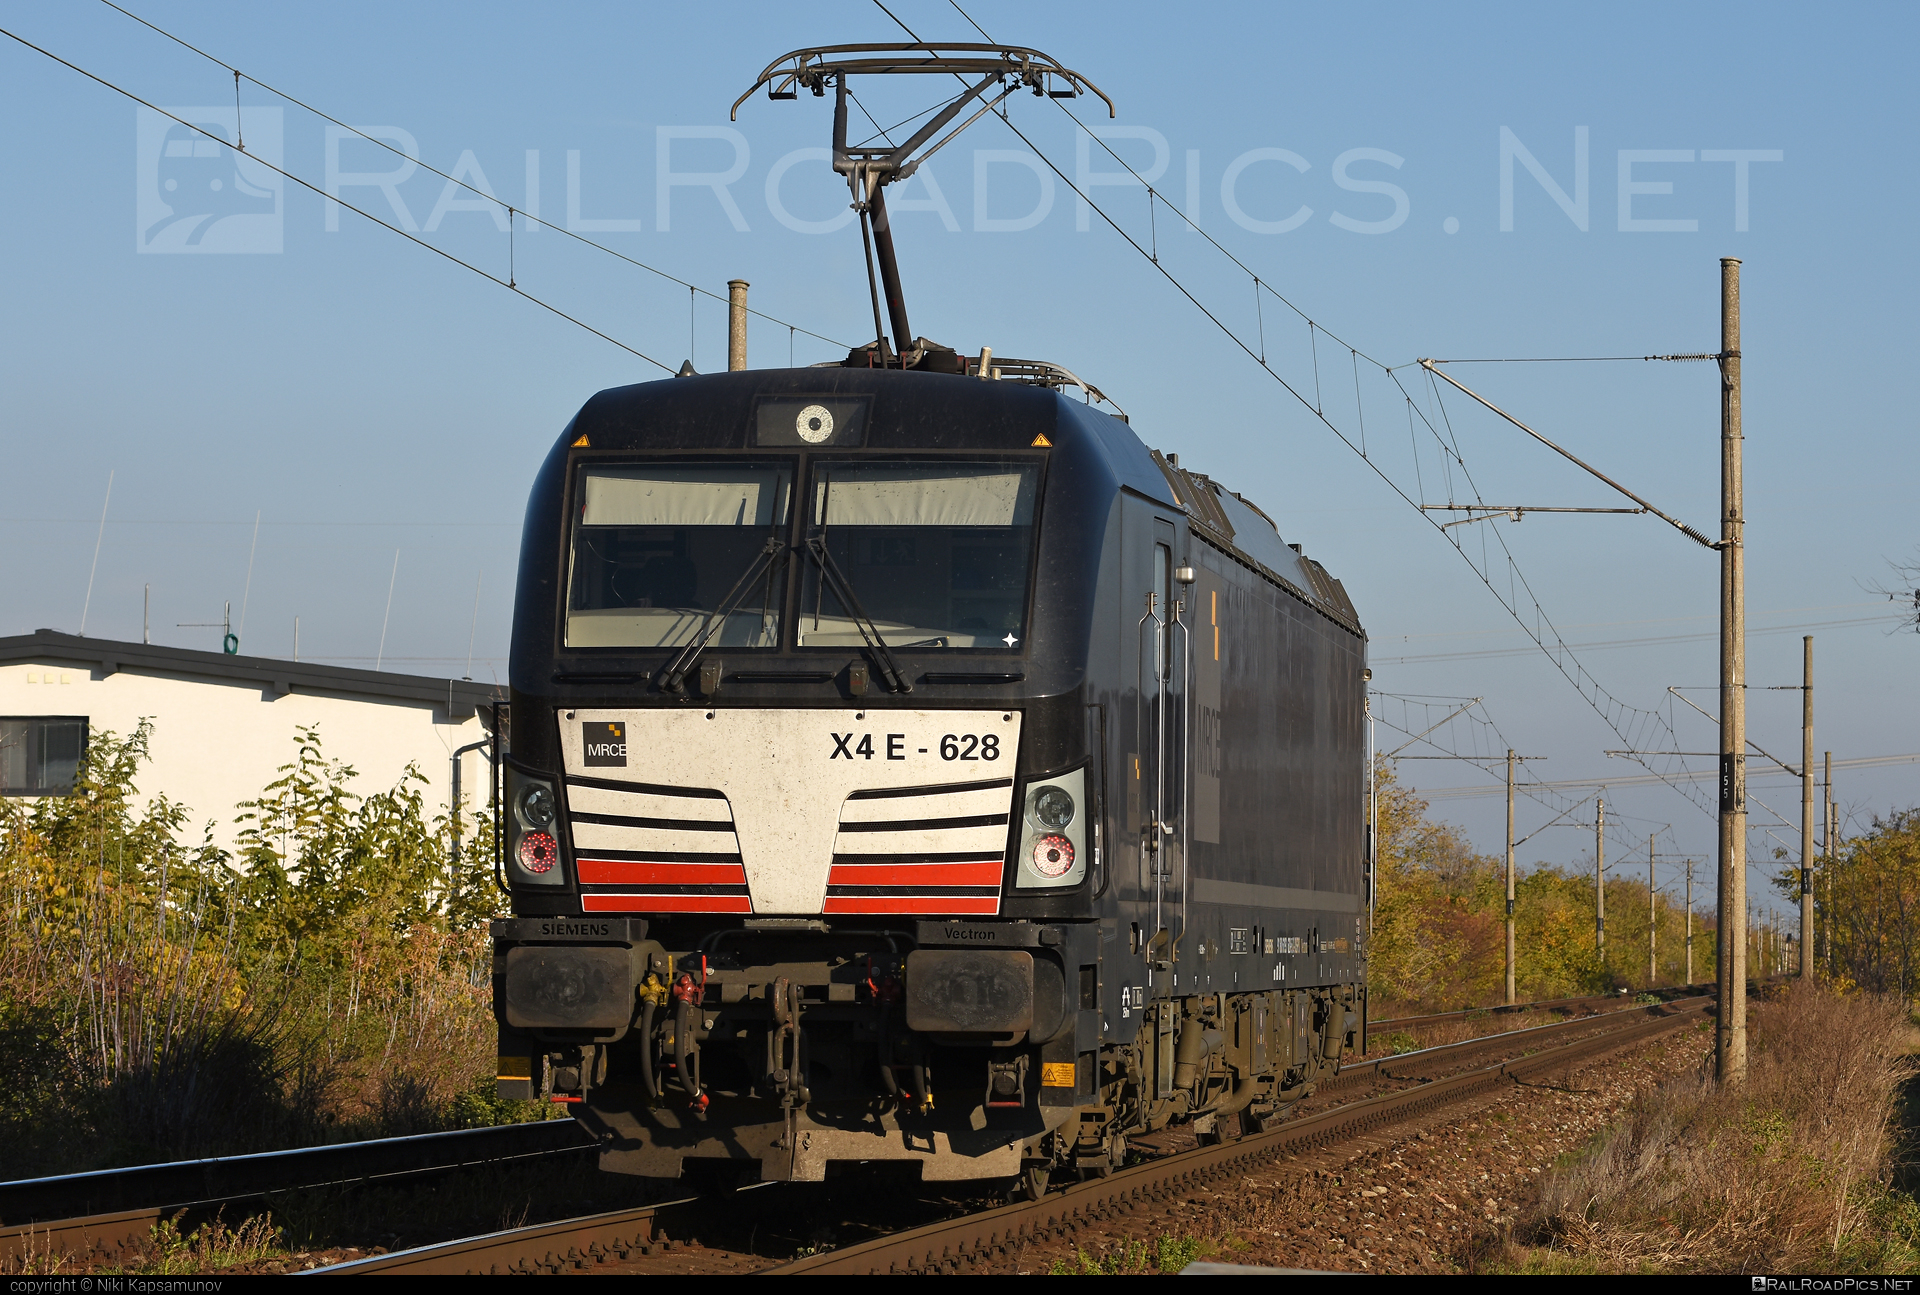 Siemens Vectron MS - 193 628 operated by Retrack Slovakia s. r. o. #dispolok #mitsuirailcapitaleurope #mitsuirailcapitaleuropegmbh #mrce #retrack #retrackslovakia #siemens #siemensVectron #siemensVectronMS #vectron #vectronMS